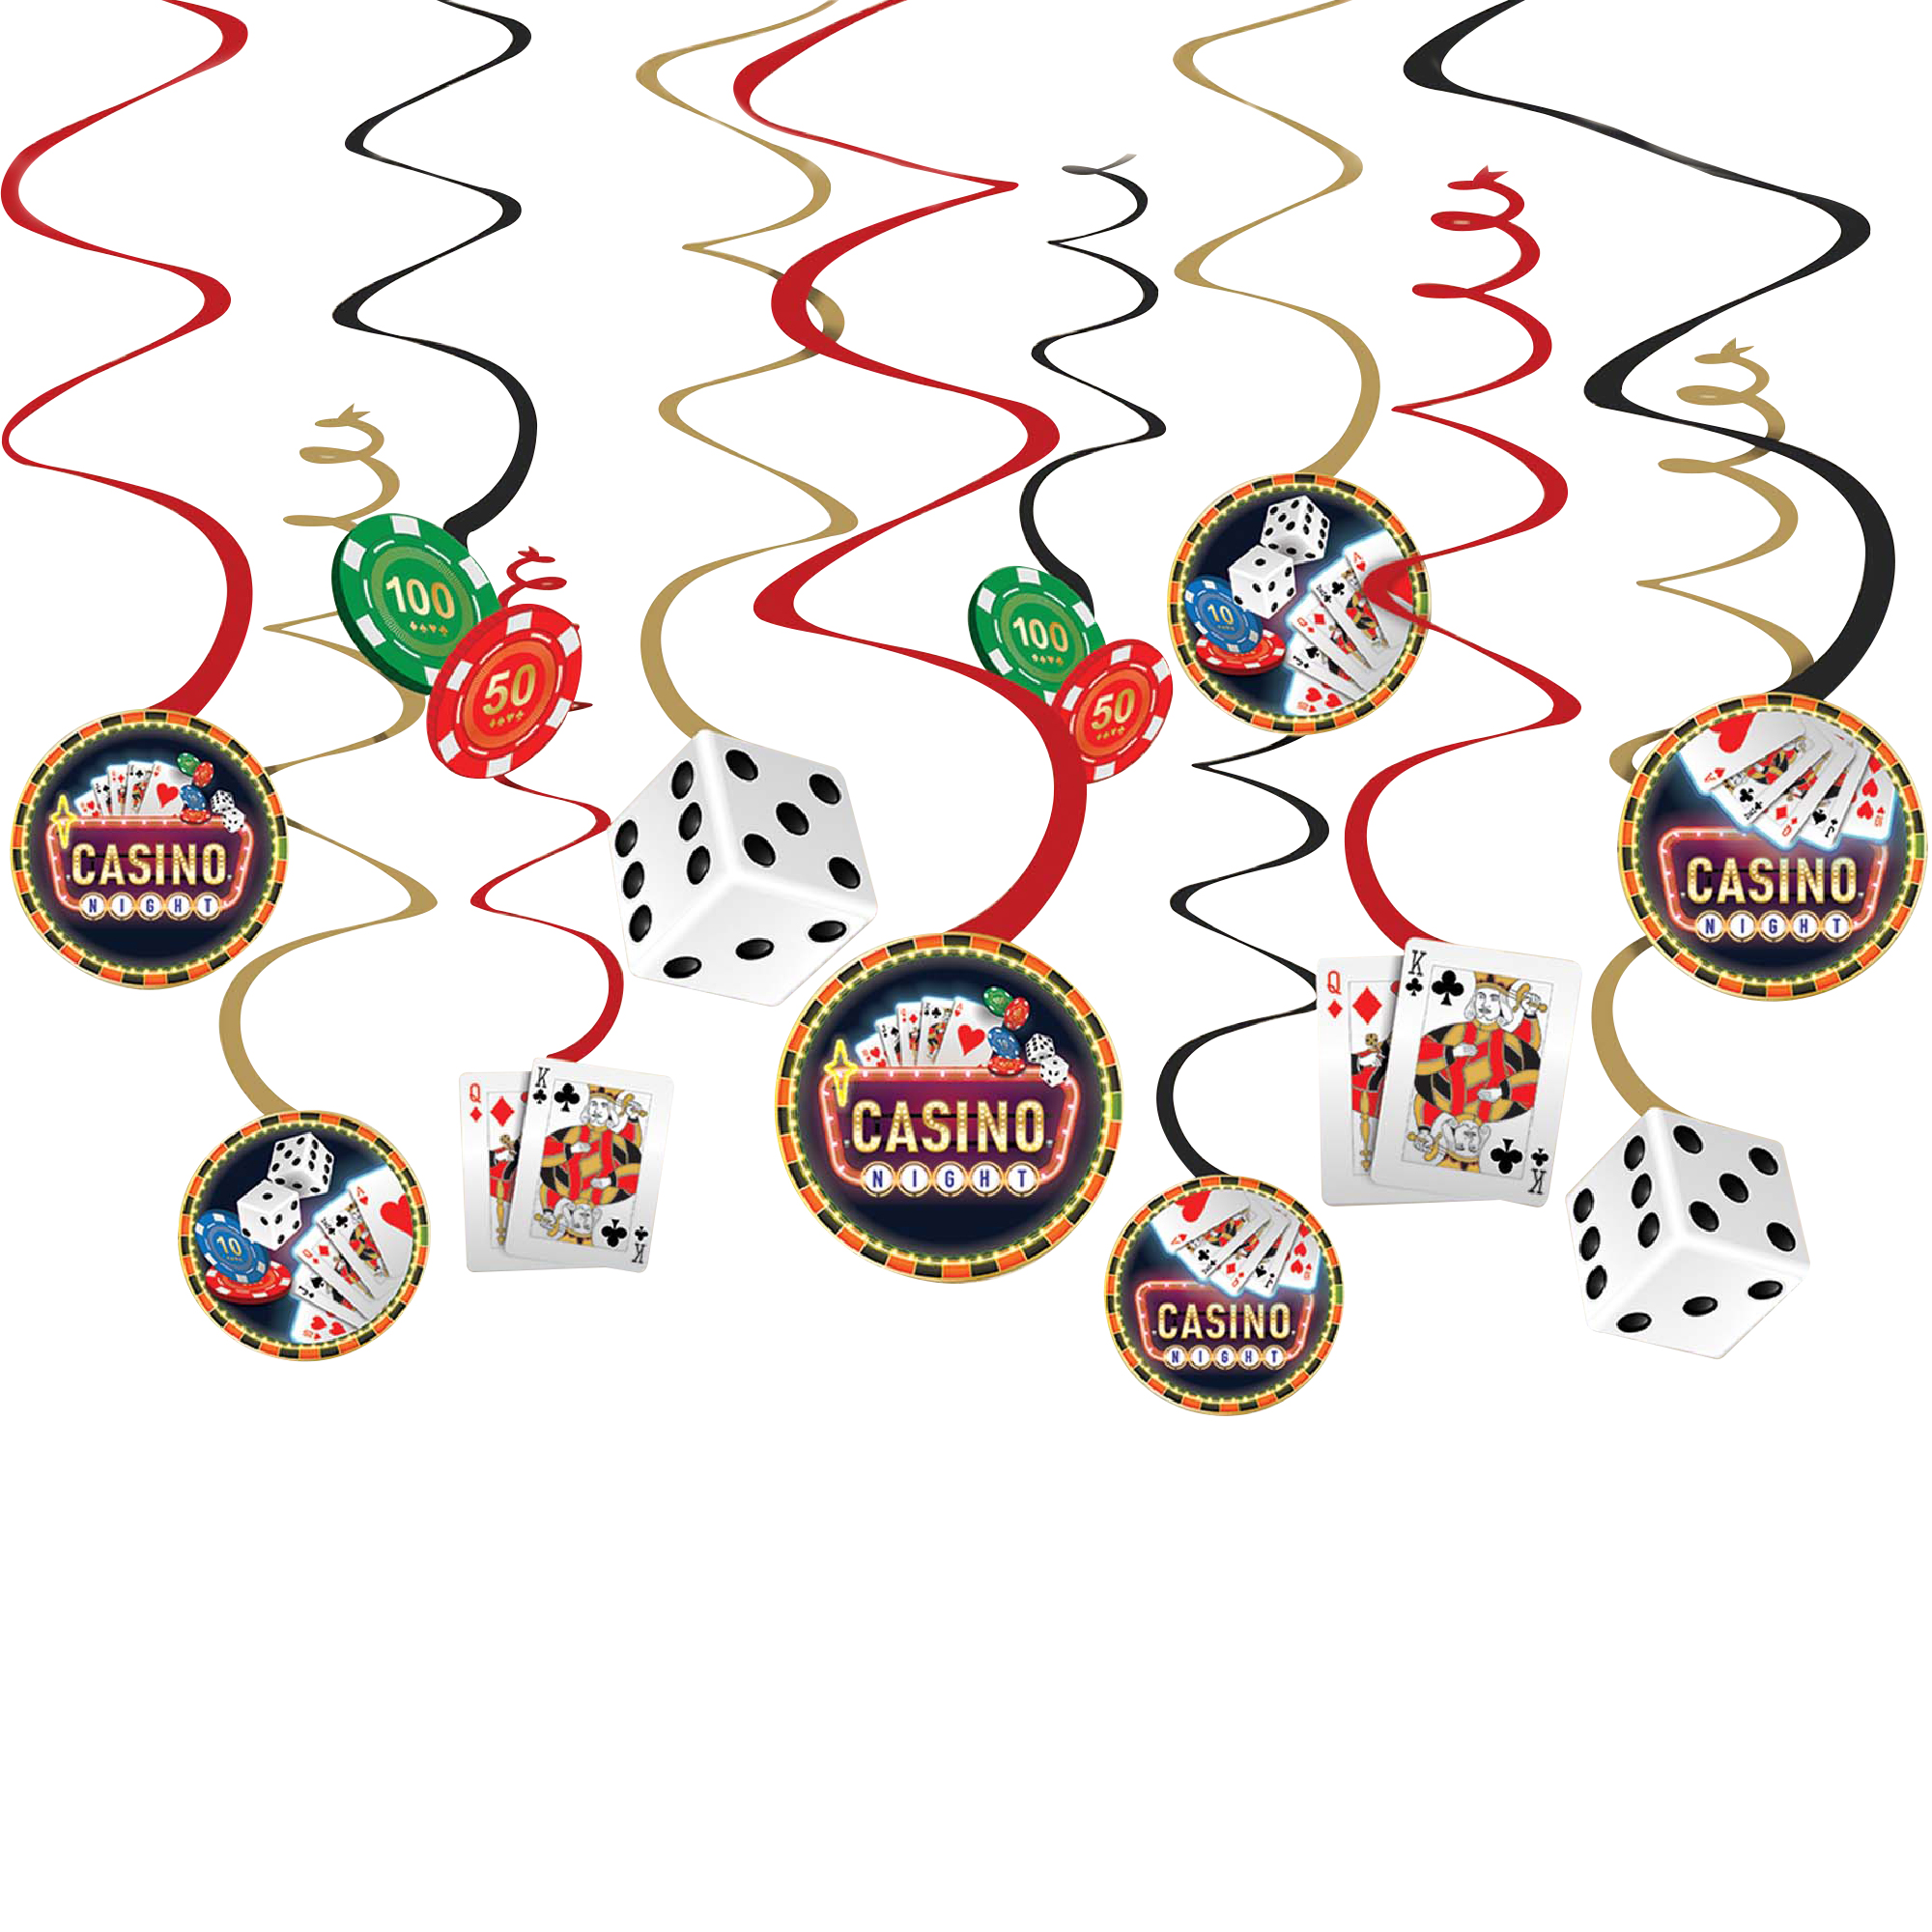 ROLL THE DICE Hanging SWIRLS Party Decorations Casino Room Poker Chip Game Cards 